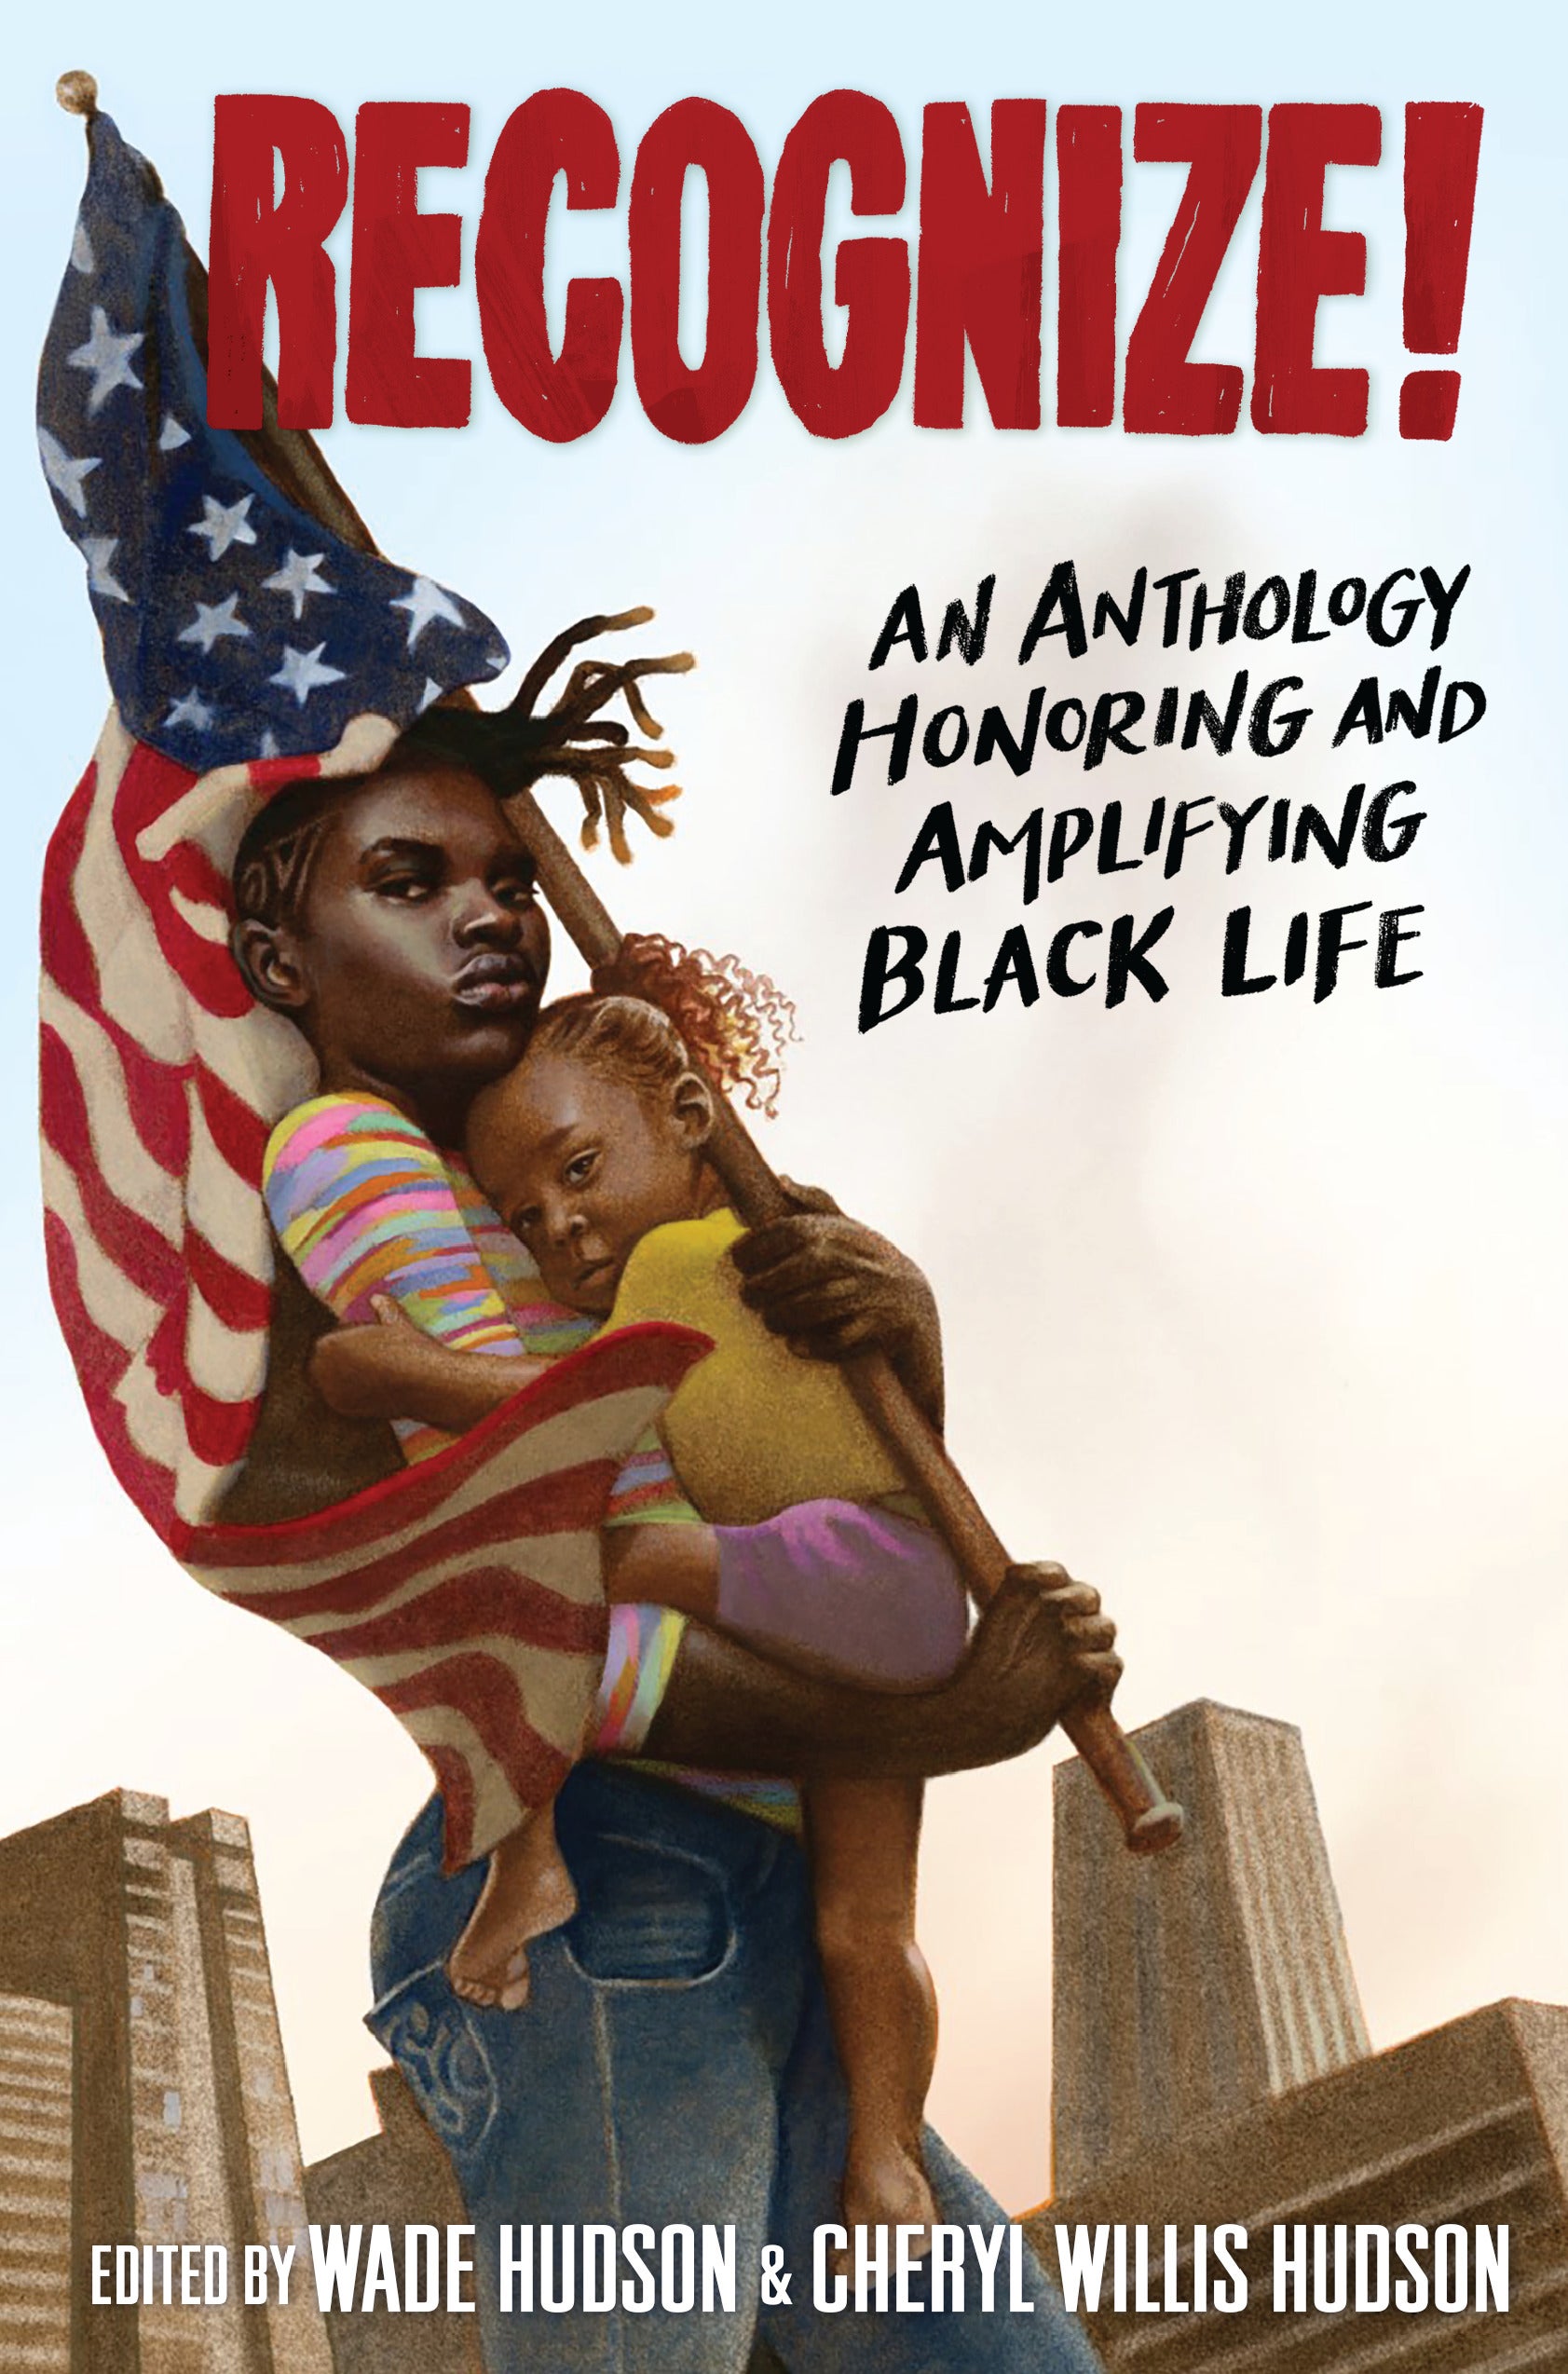 19 Black Children's Books To Share With The Little Ones In Your Life